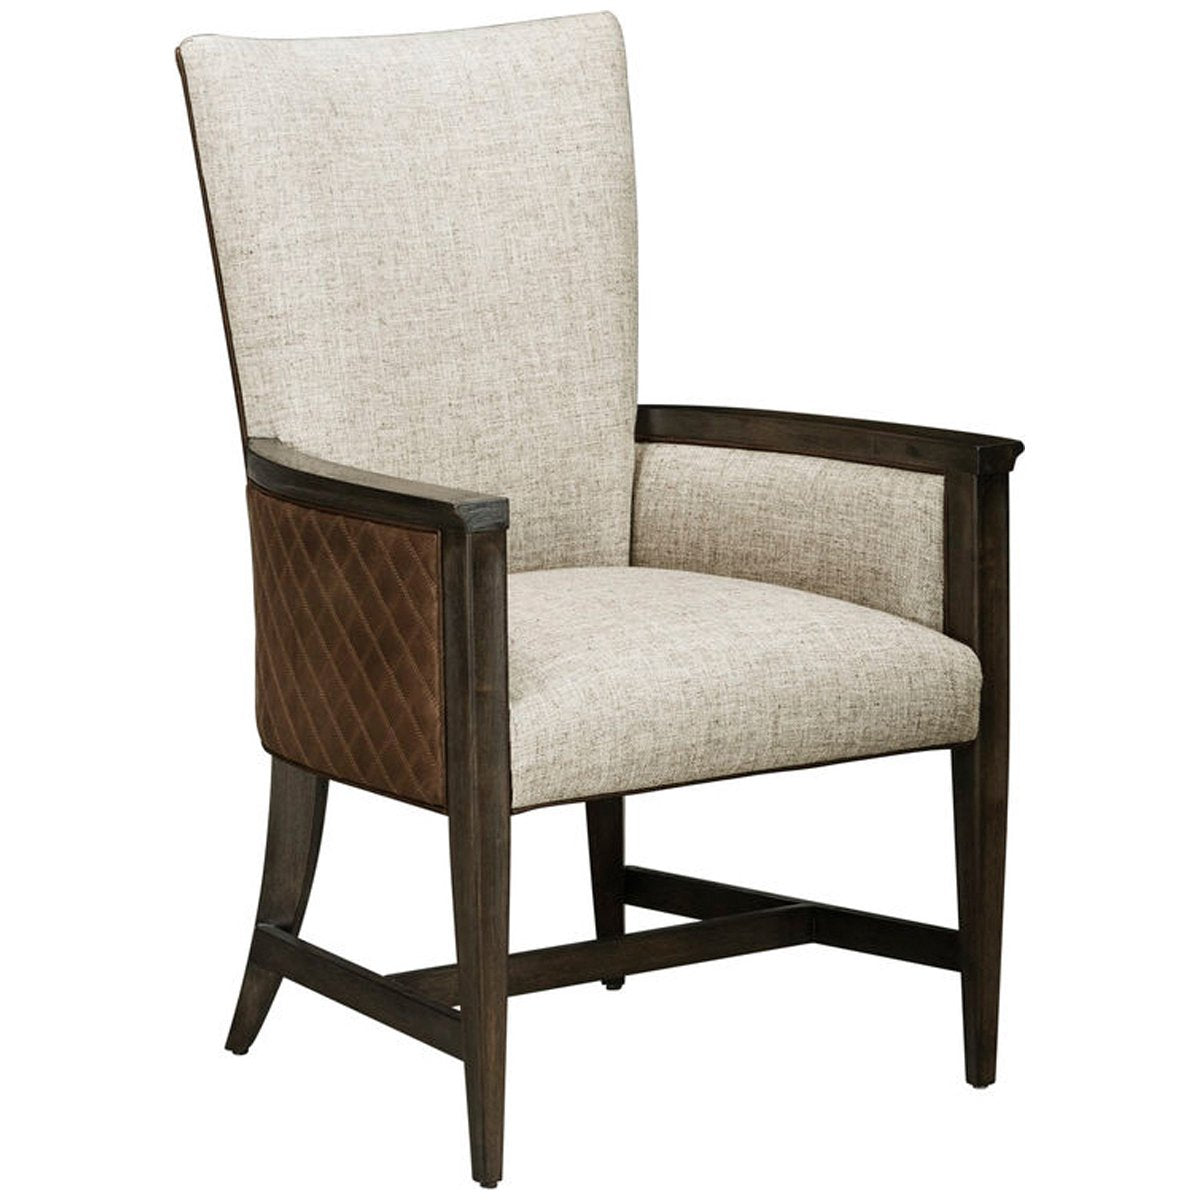 A.R.T. Furniture Woodwright Racine Upholstered Arm Chair, Set of 2